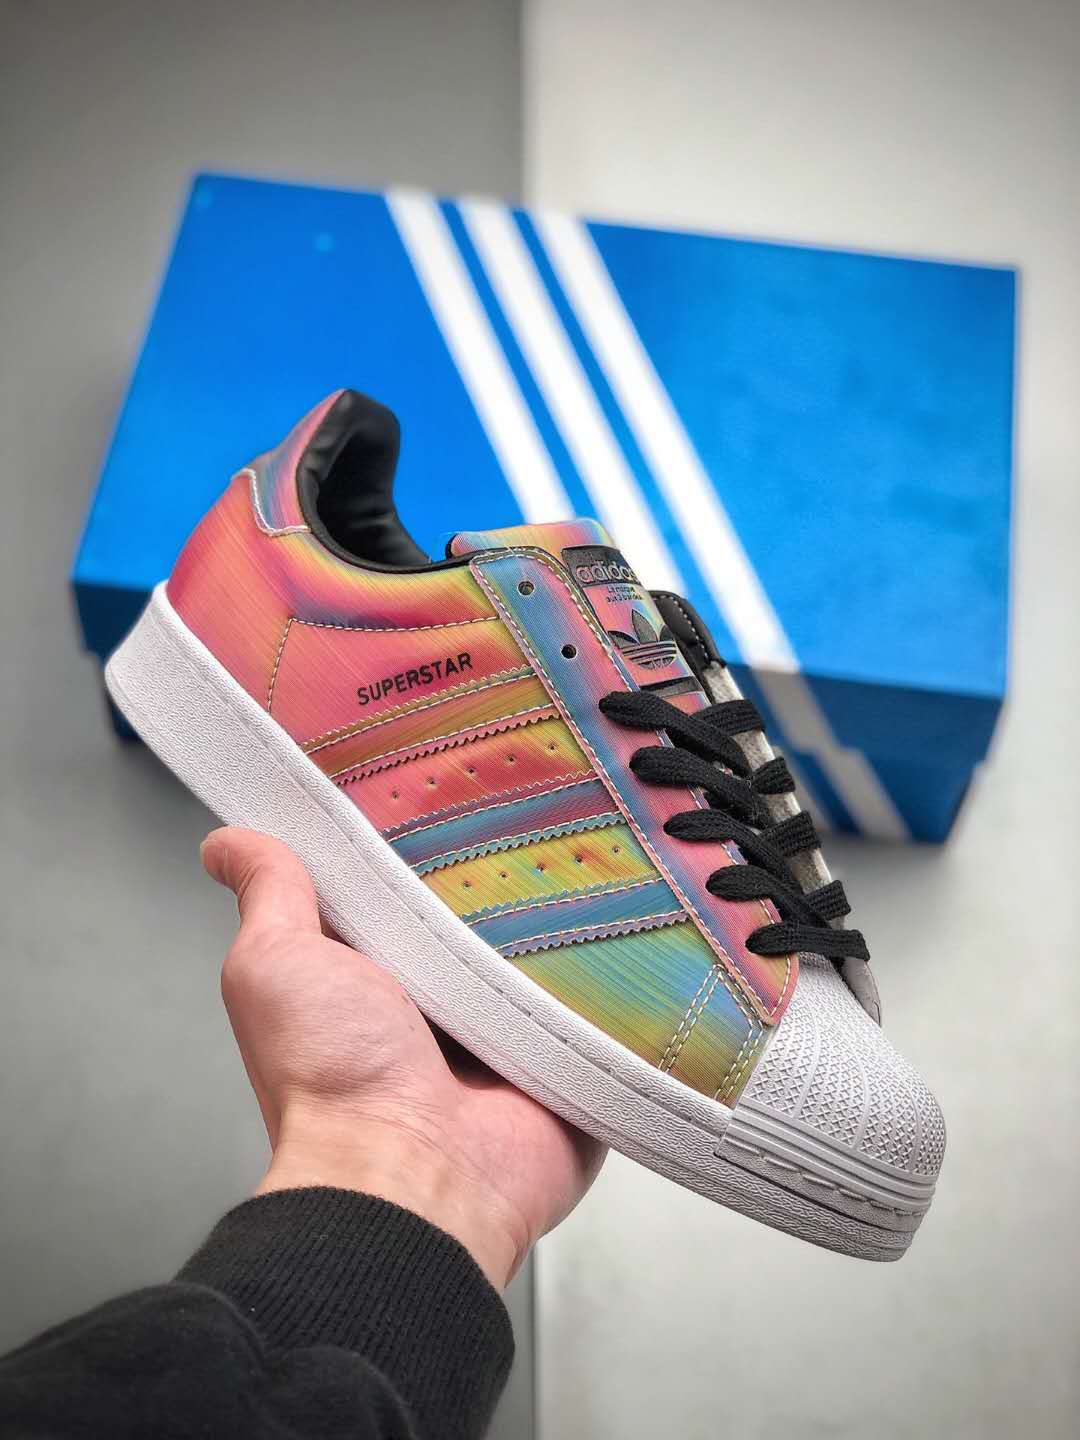 Adidas Superstar Iridescent FX7779 - Shop the Latest in Athletic Shoes